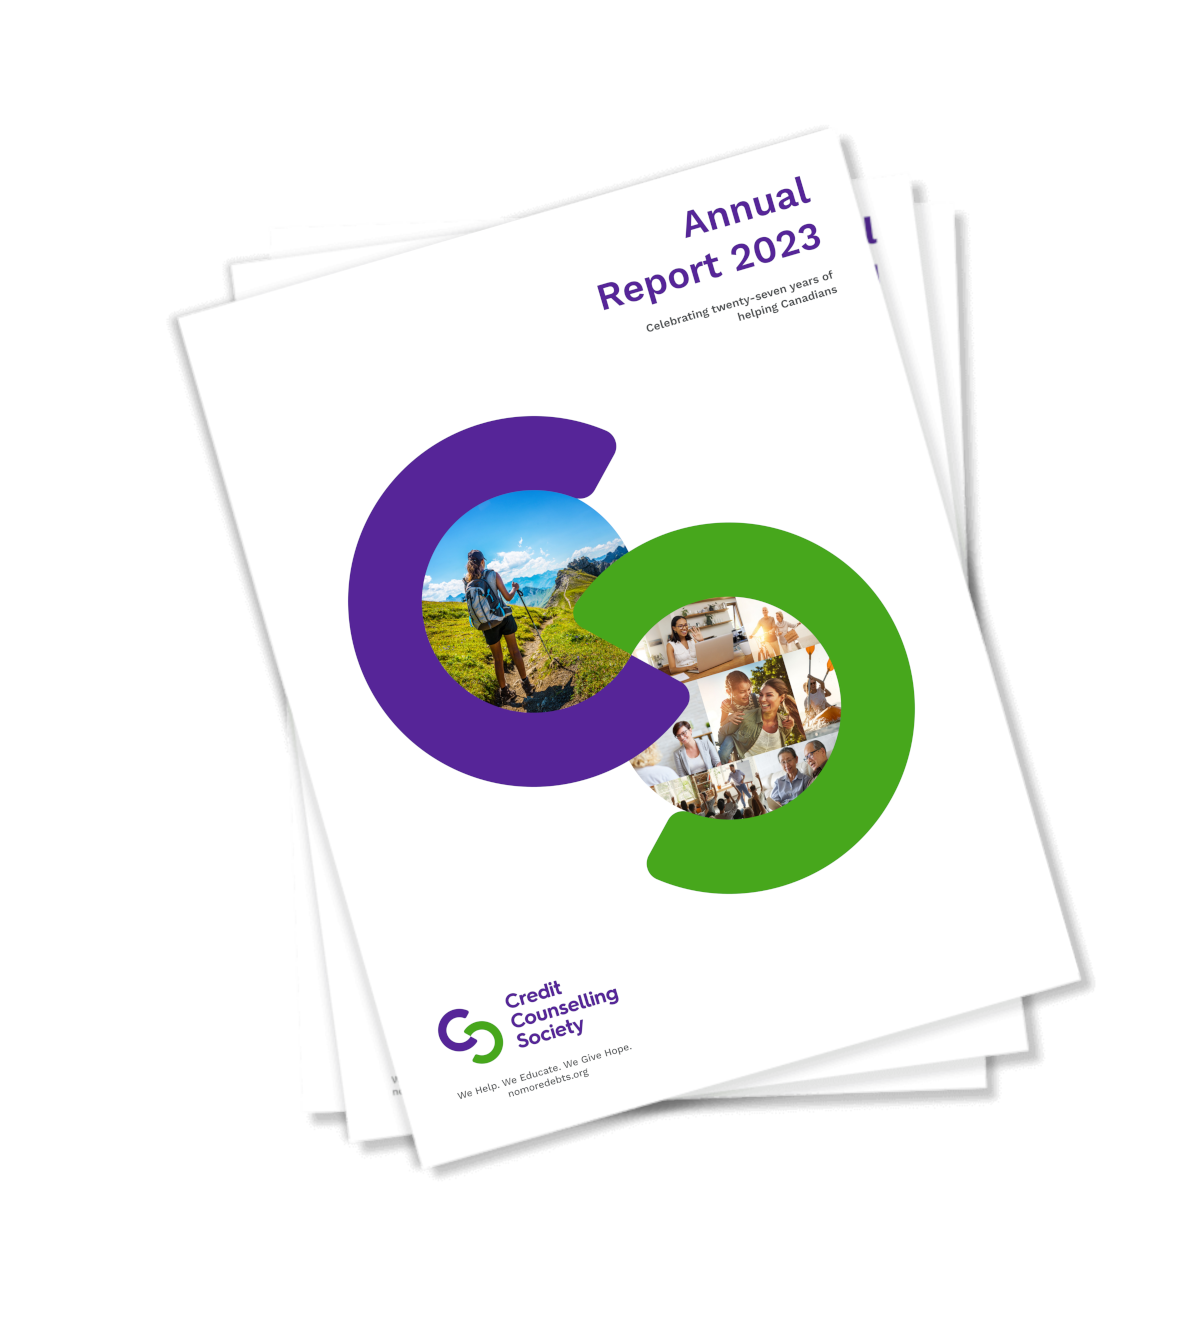 Stack of Annual Reports for the Credit Counselling Society with the 2023 report on top.